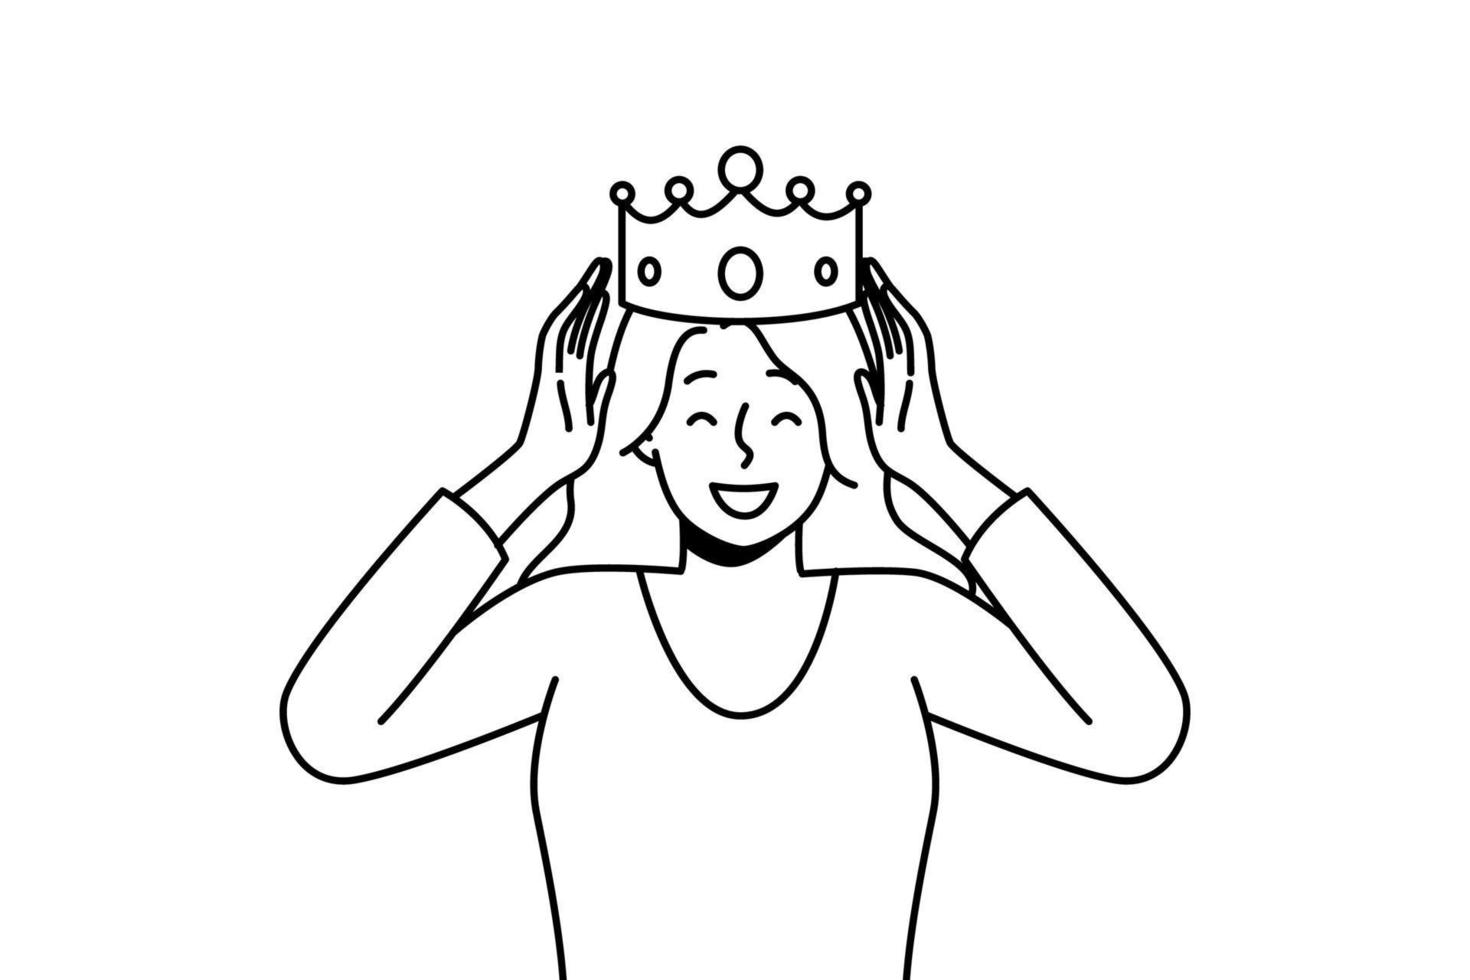 Smiling young woman with crown on head celebrate success. Happy confident female crowned for good results or achievements. Vector illustration.